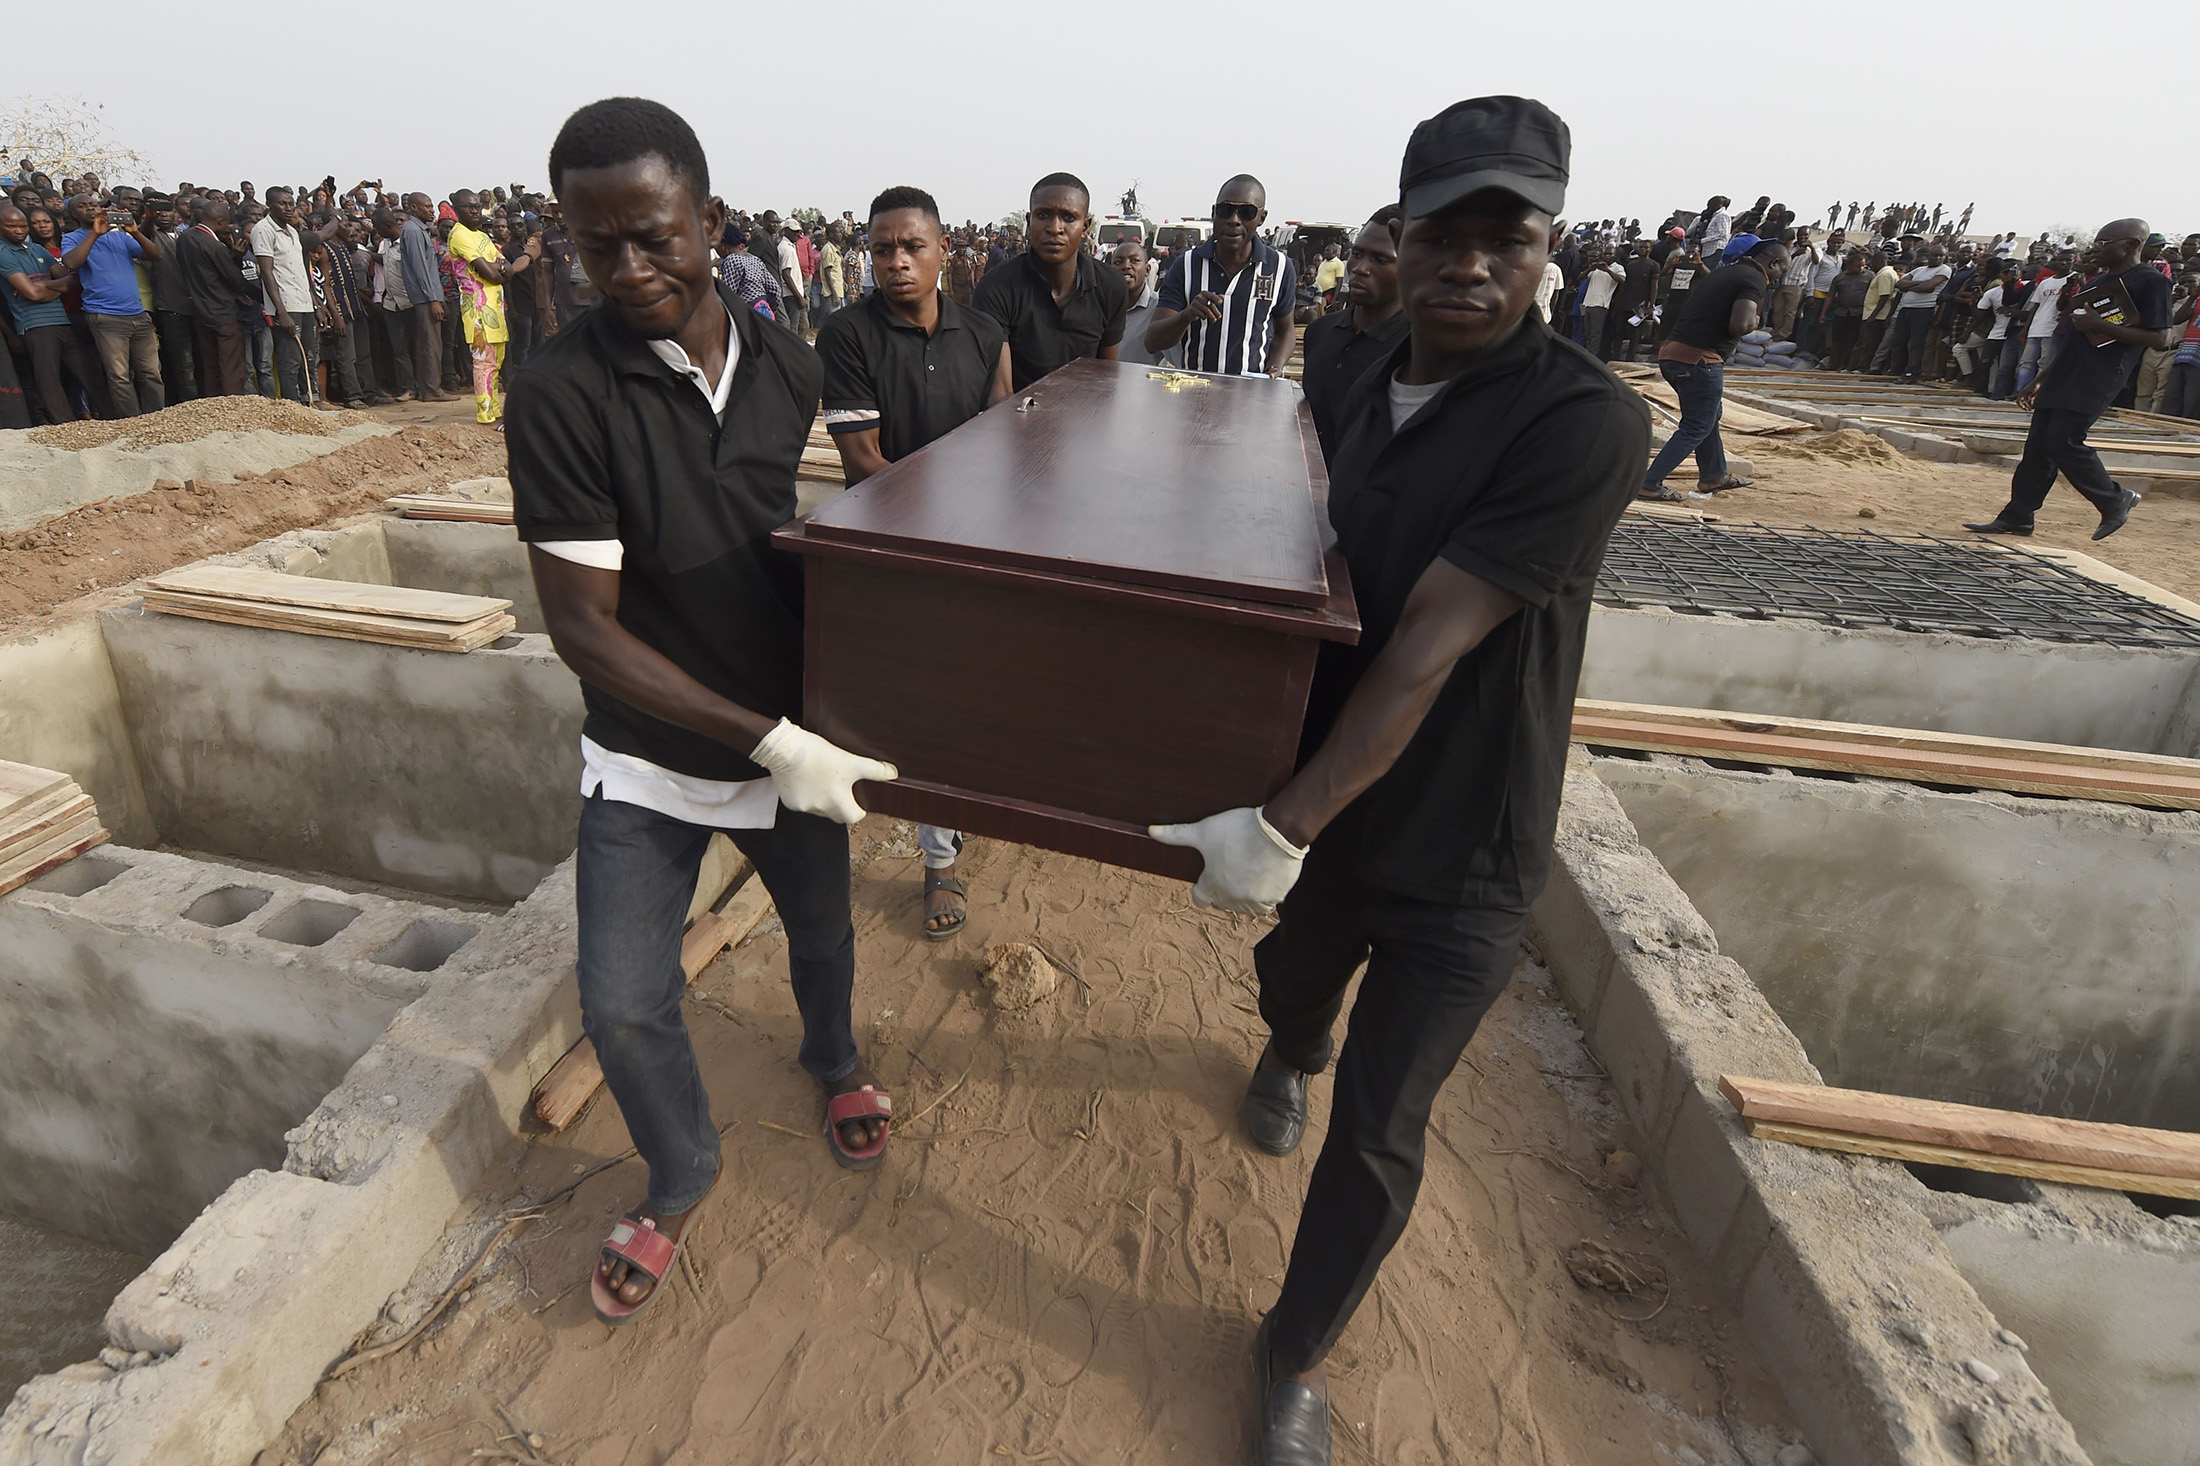 Pall bearers during the funeral service for people killed during cattle herder-farmer clashes in January 2018.